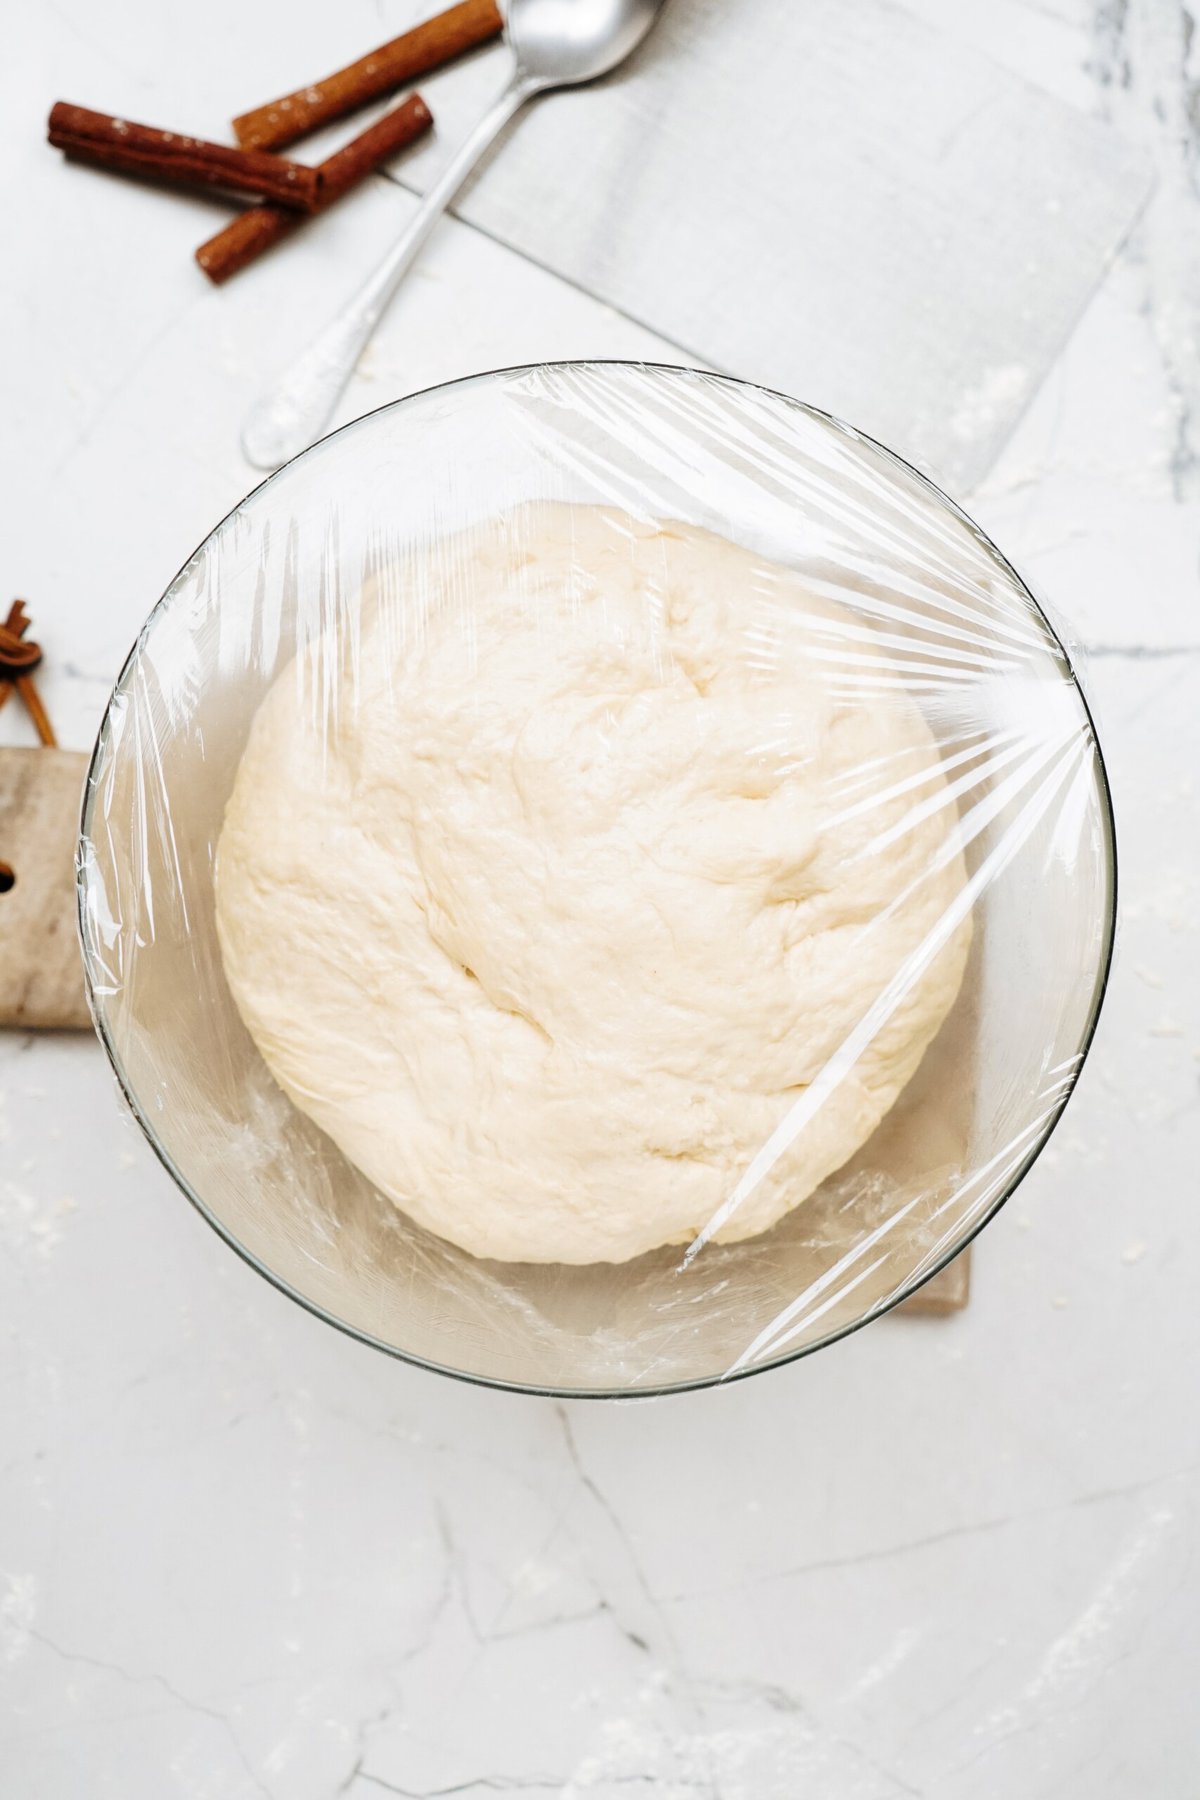 A glass bowl filled with dough, soon to become delicious cinnamon rolls, rests on a marble surface covered in plastic wrap. A spoon and cinnamon sticks are in the background.